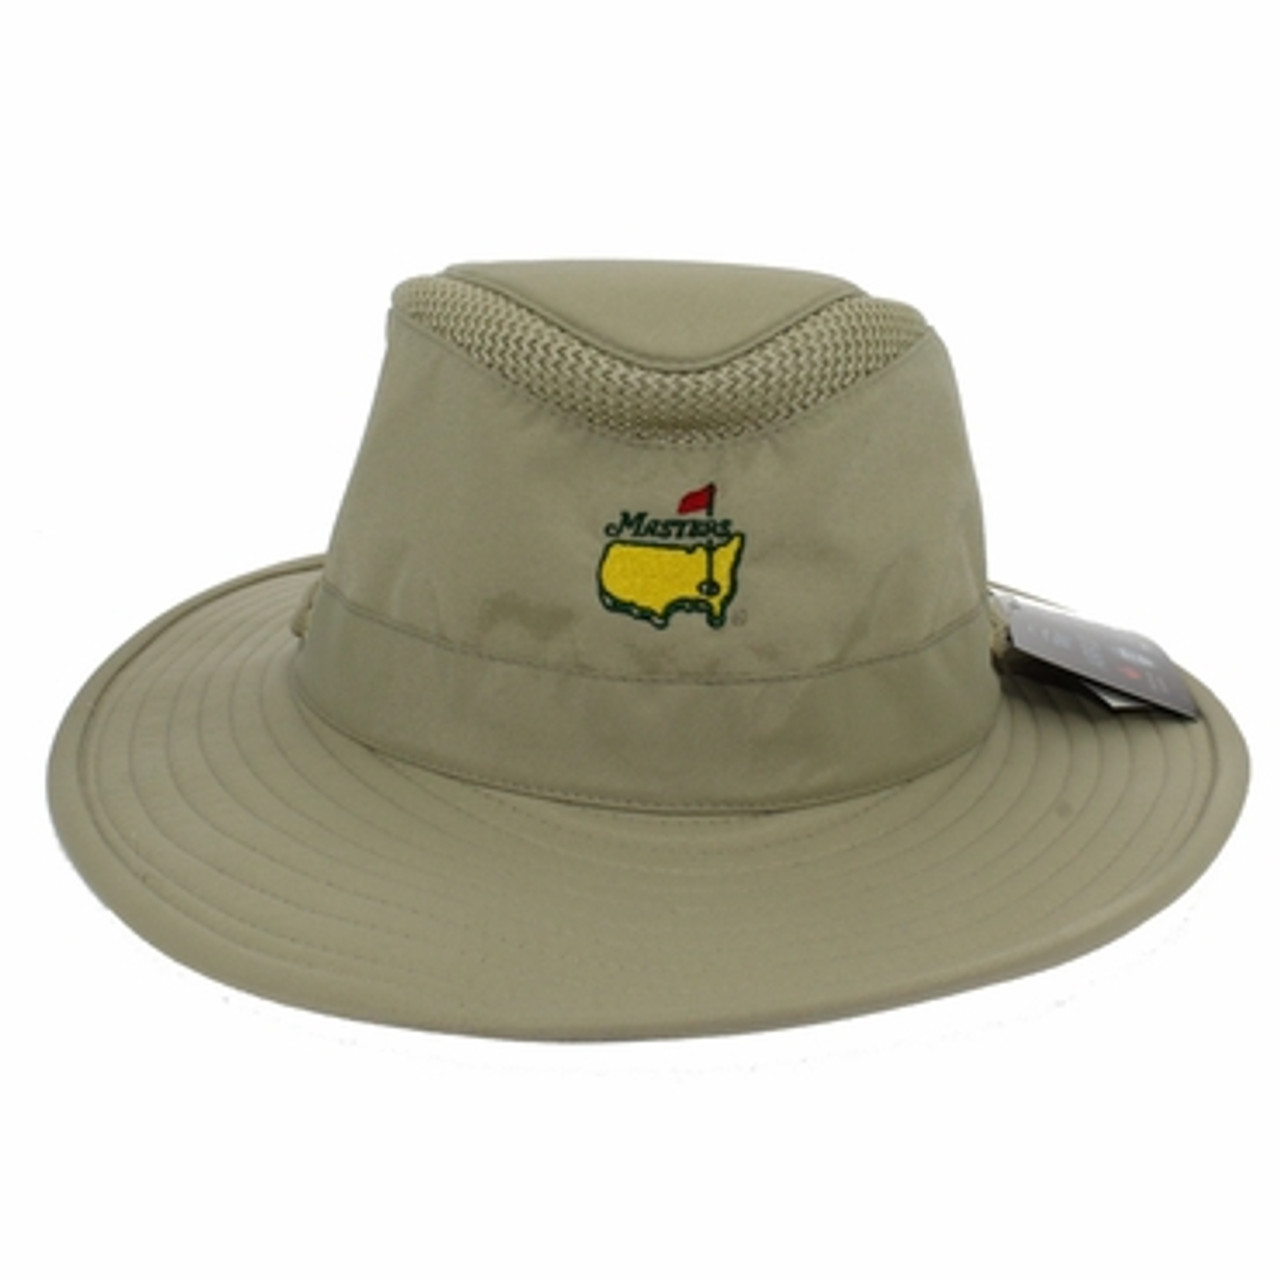 Masters Stone Tilley Brimmed Airflo Hat, Hats & Visors